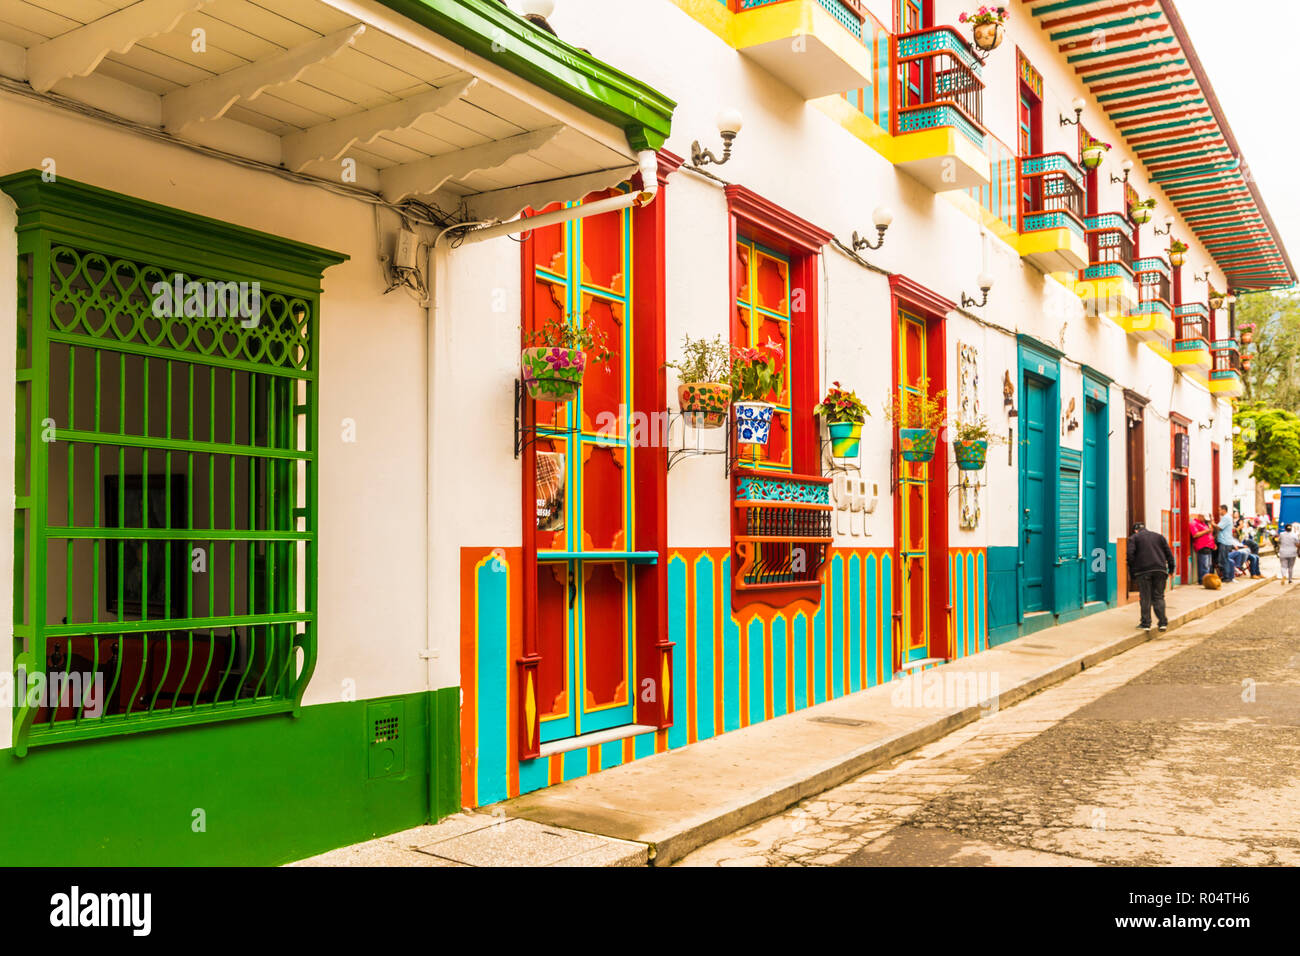 A colourful street scene with its preserved and colonial buildings, Jardin, Colombia, South America Stock Photo